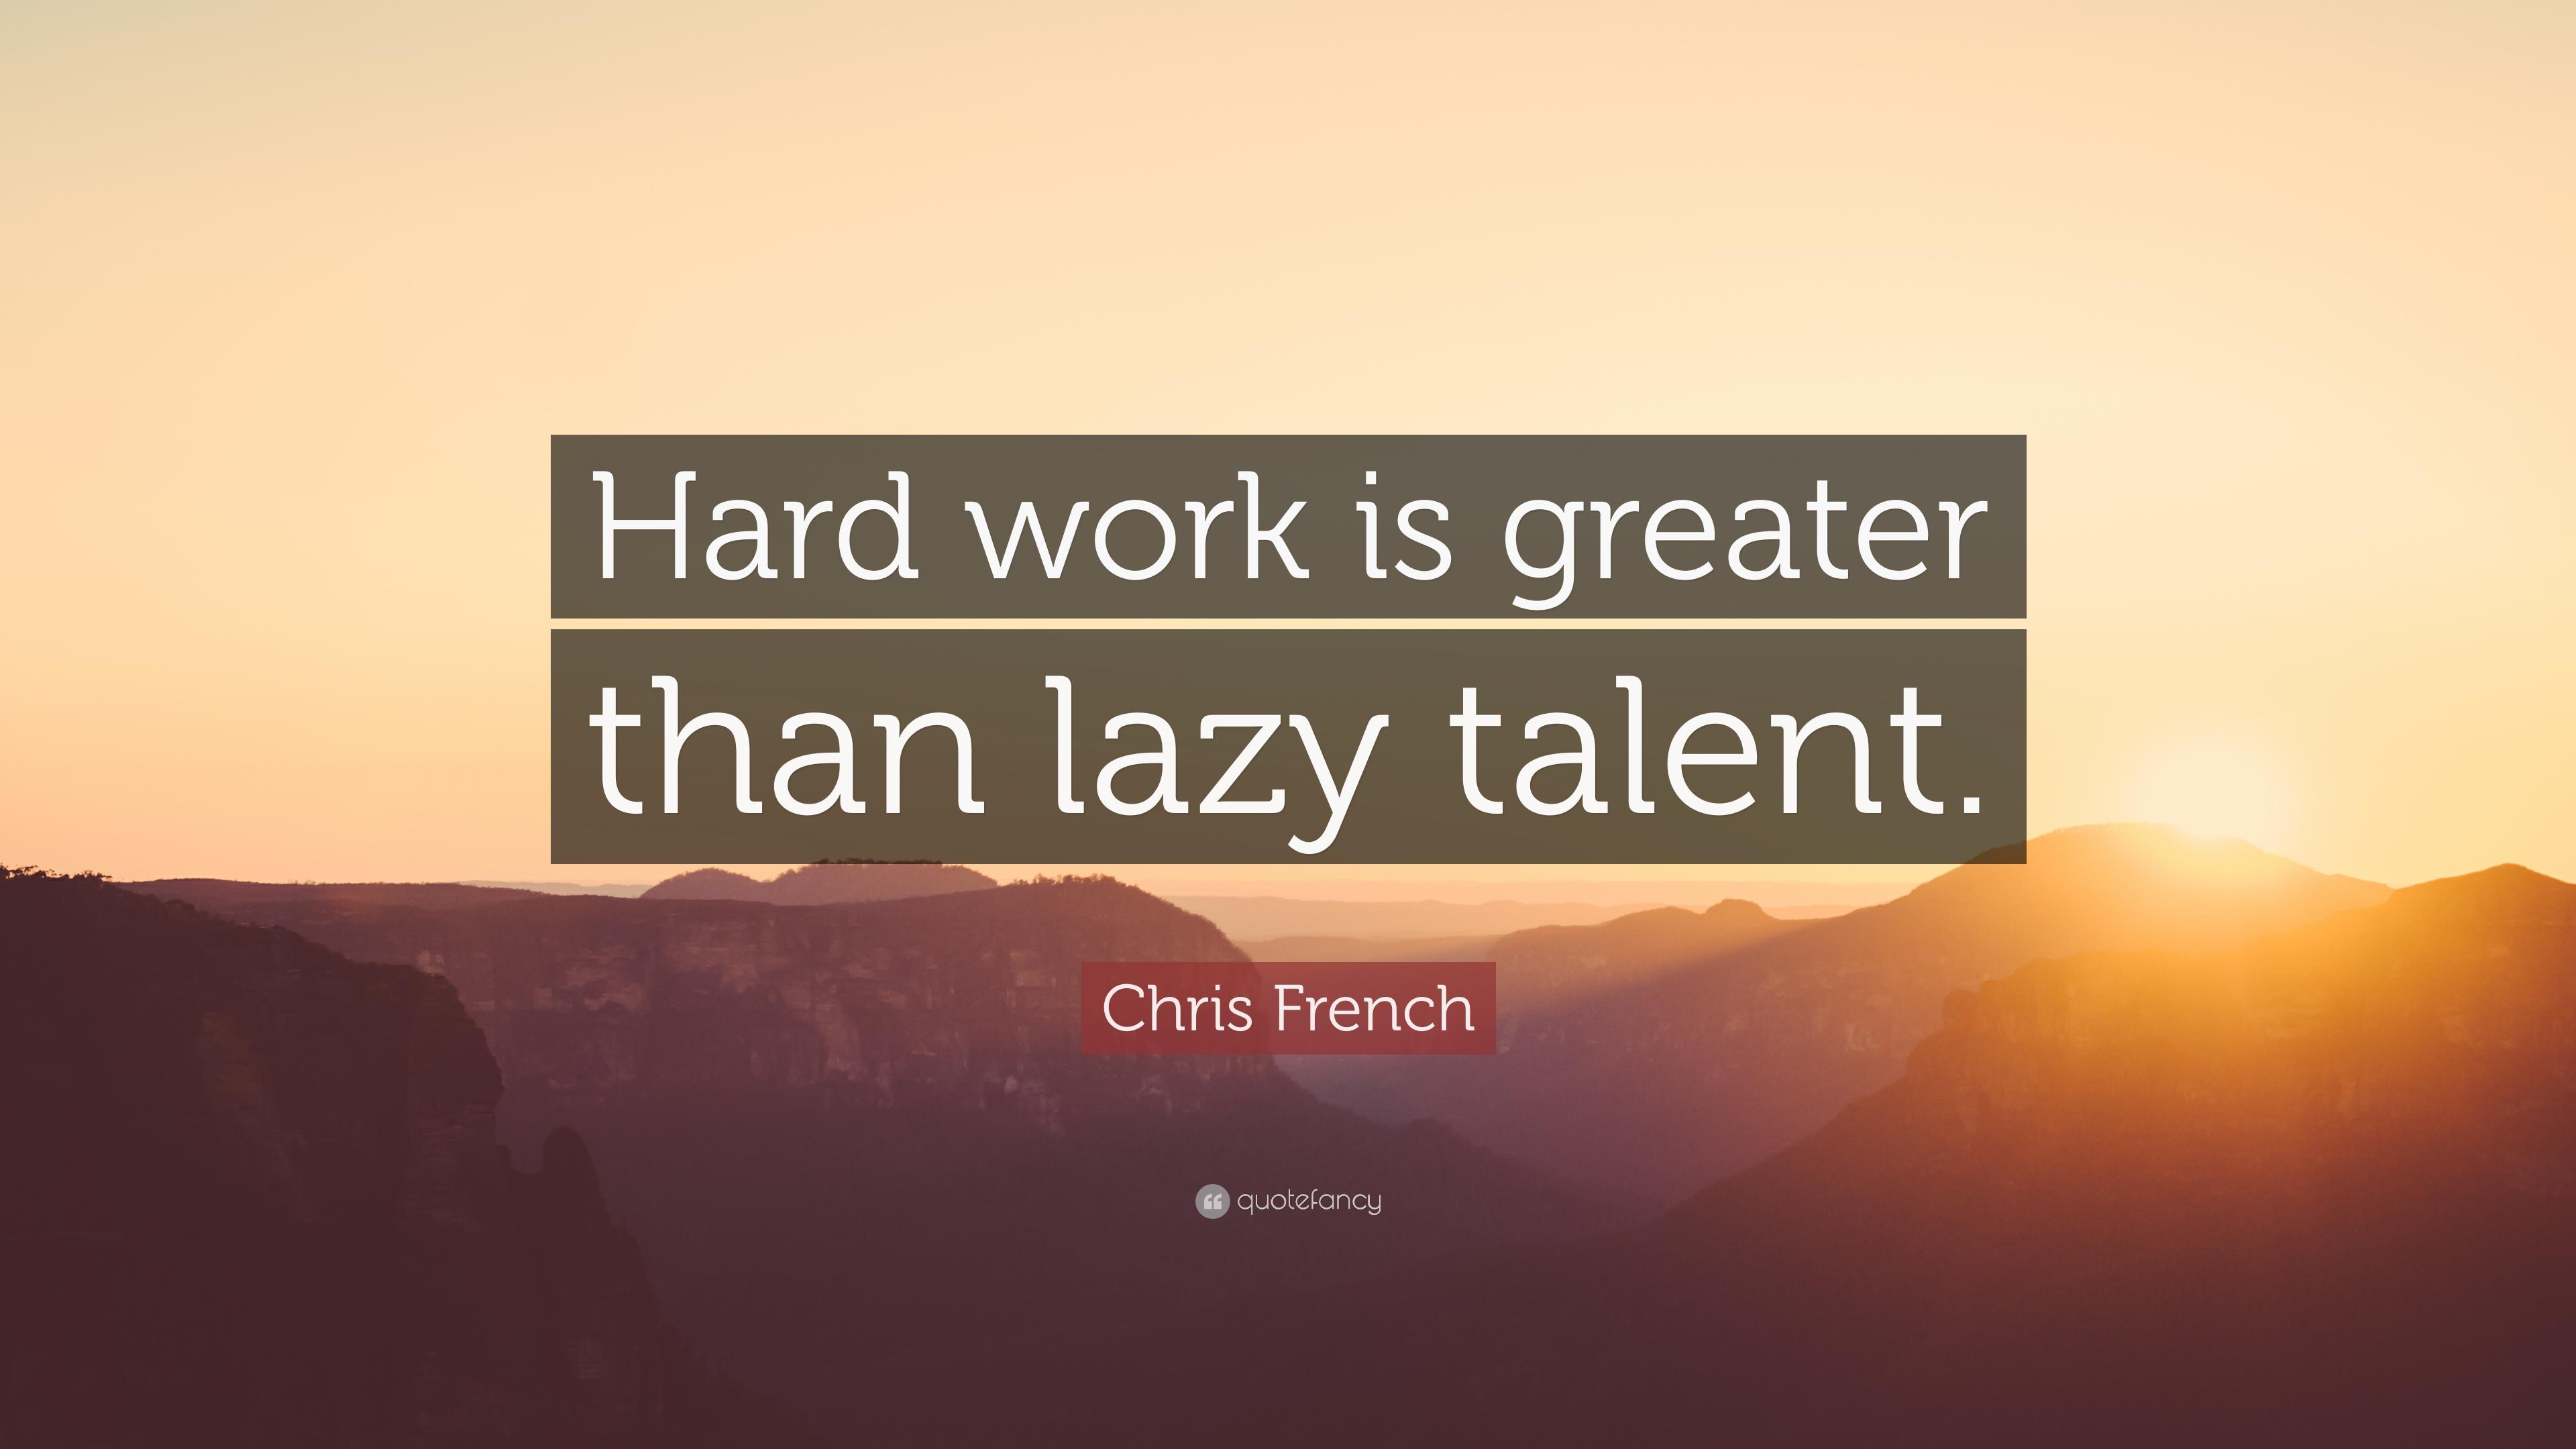 Chris French Quote: “Hard work is greater than lazy talent.” 12